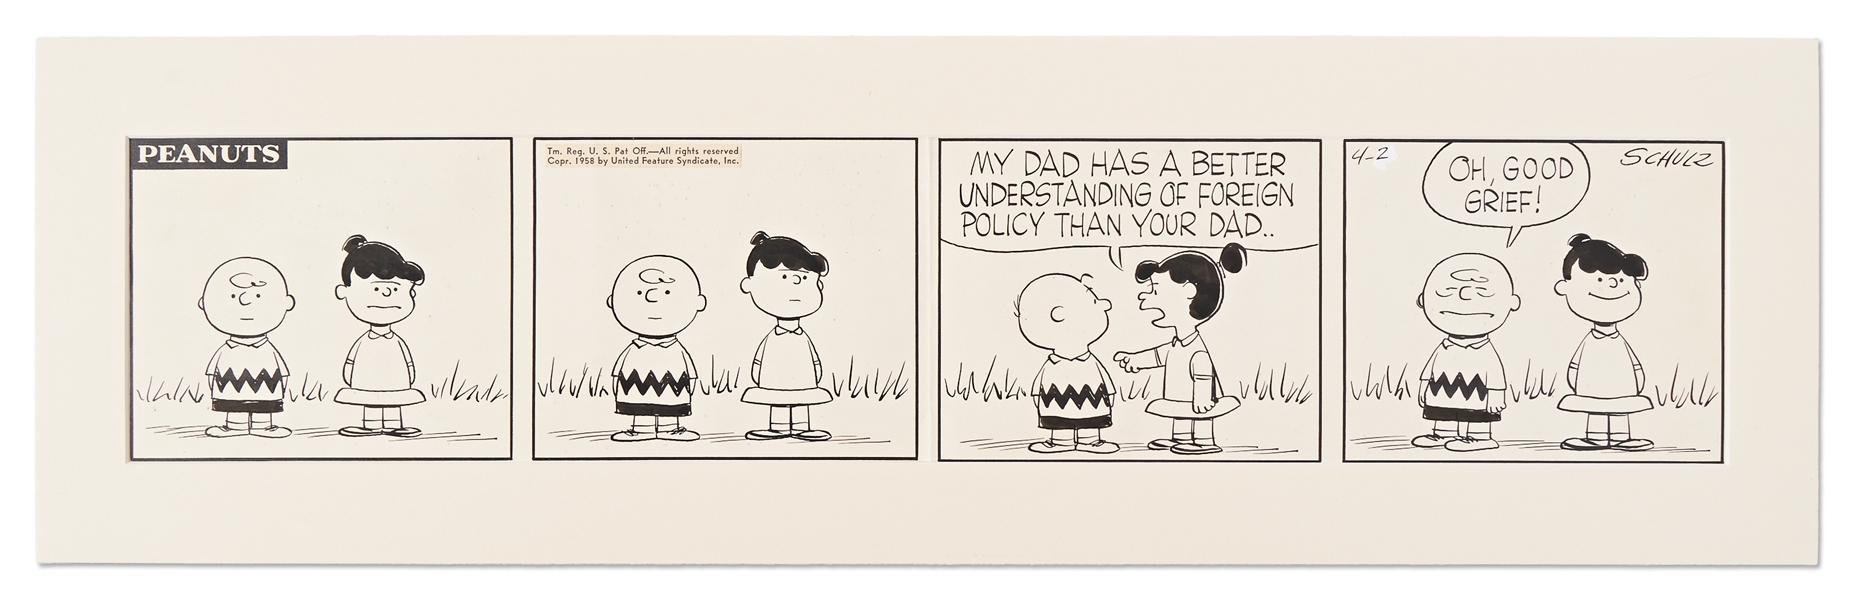 Original Charles Schulz Hand-Drawn ''Peanuts'' Comic Strip from 1958 -- ''Oh, Good Grief!''